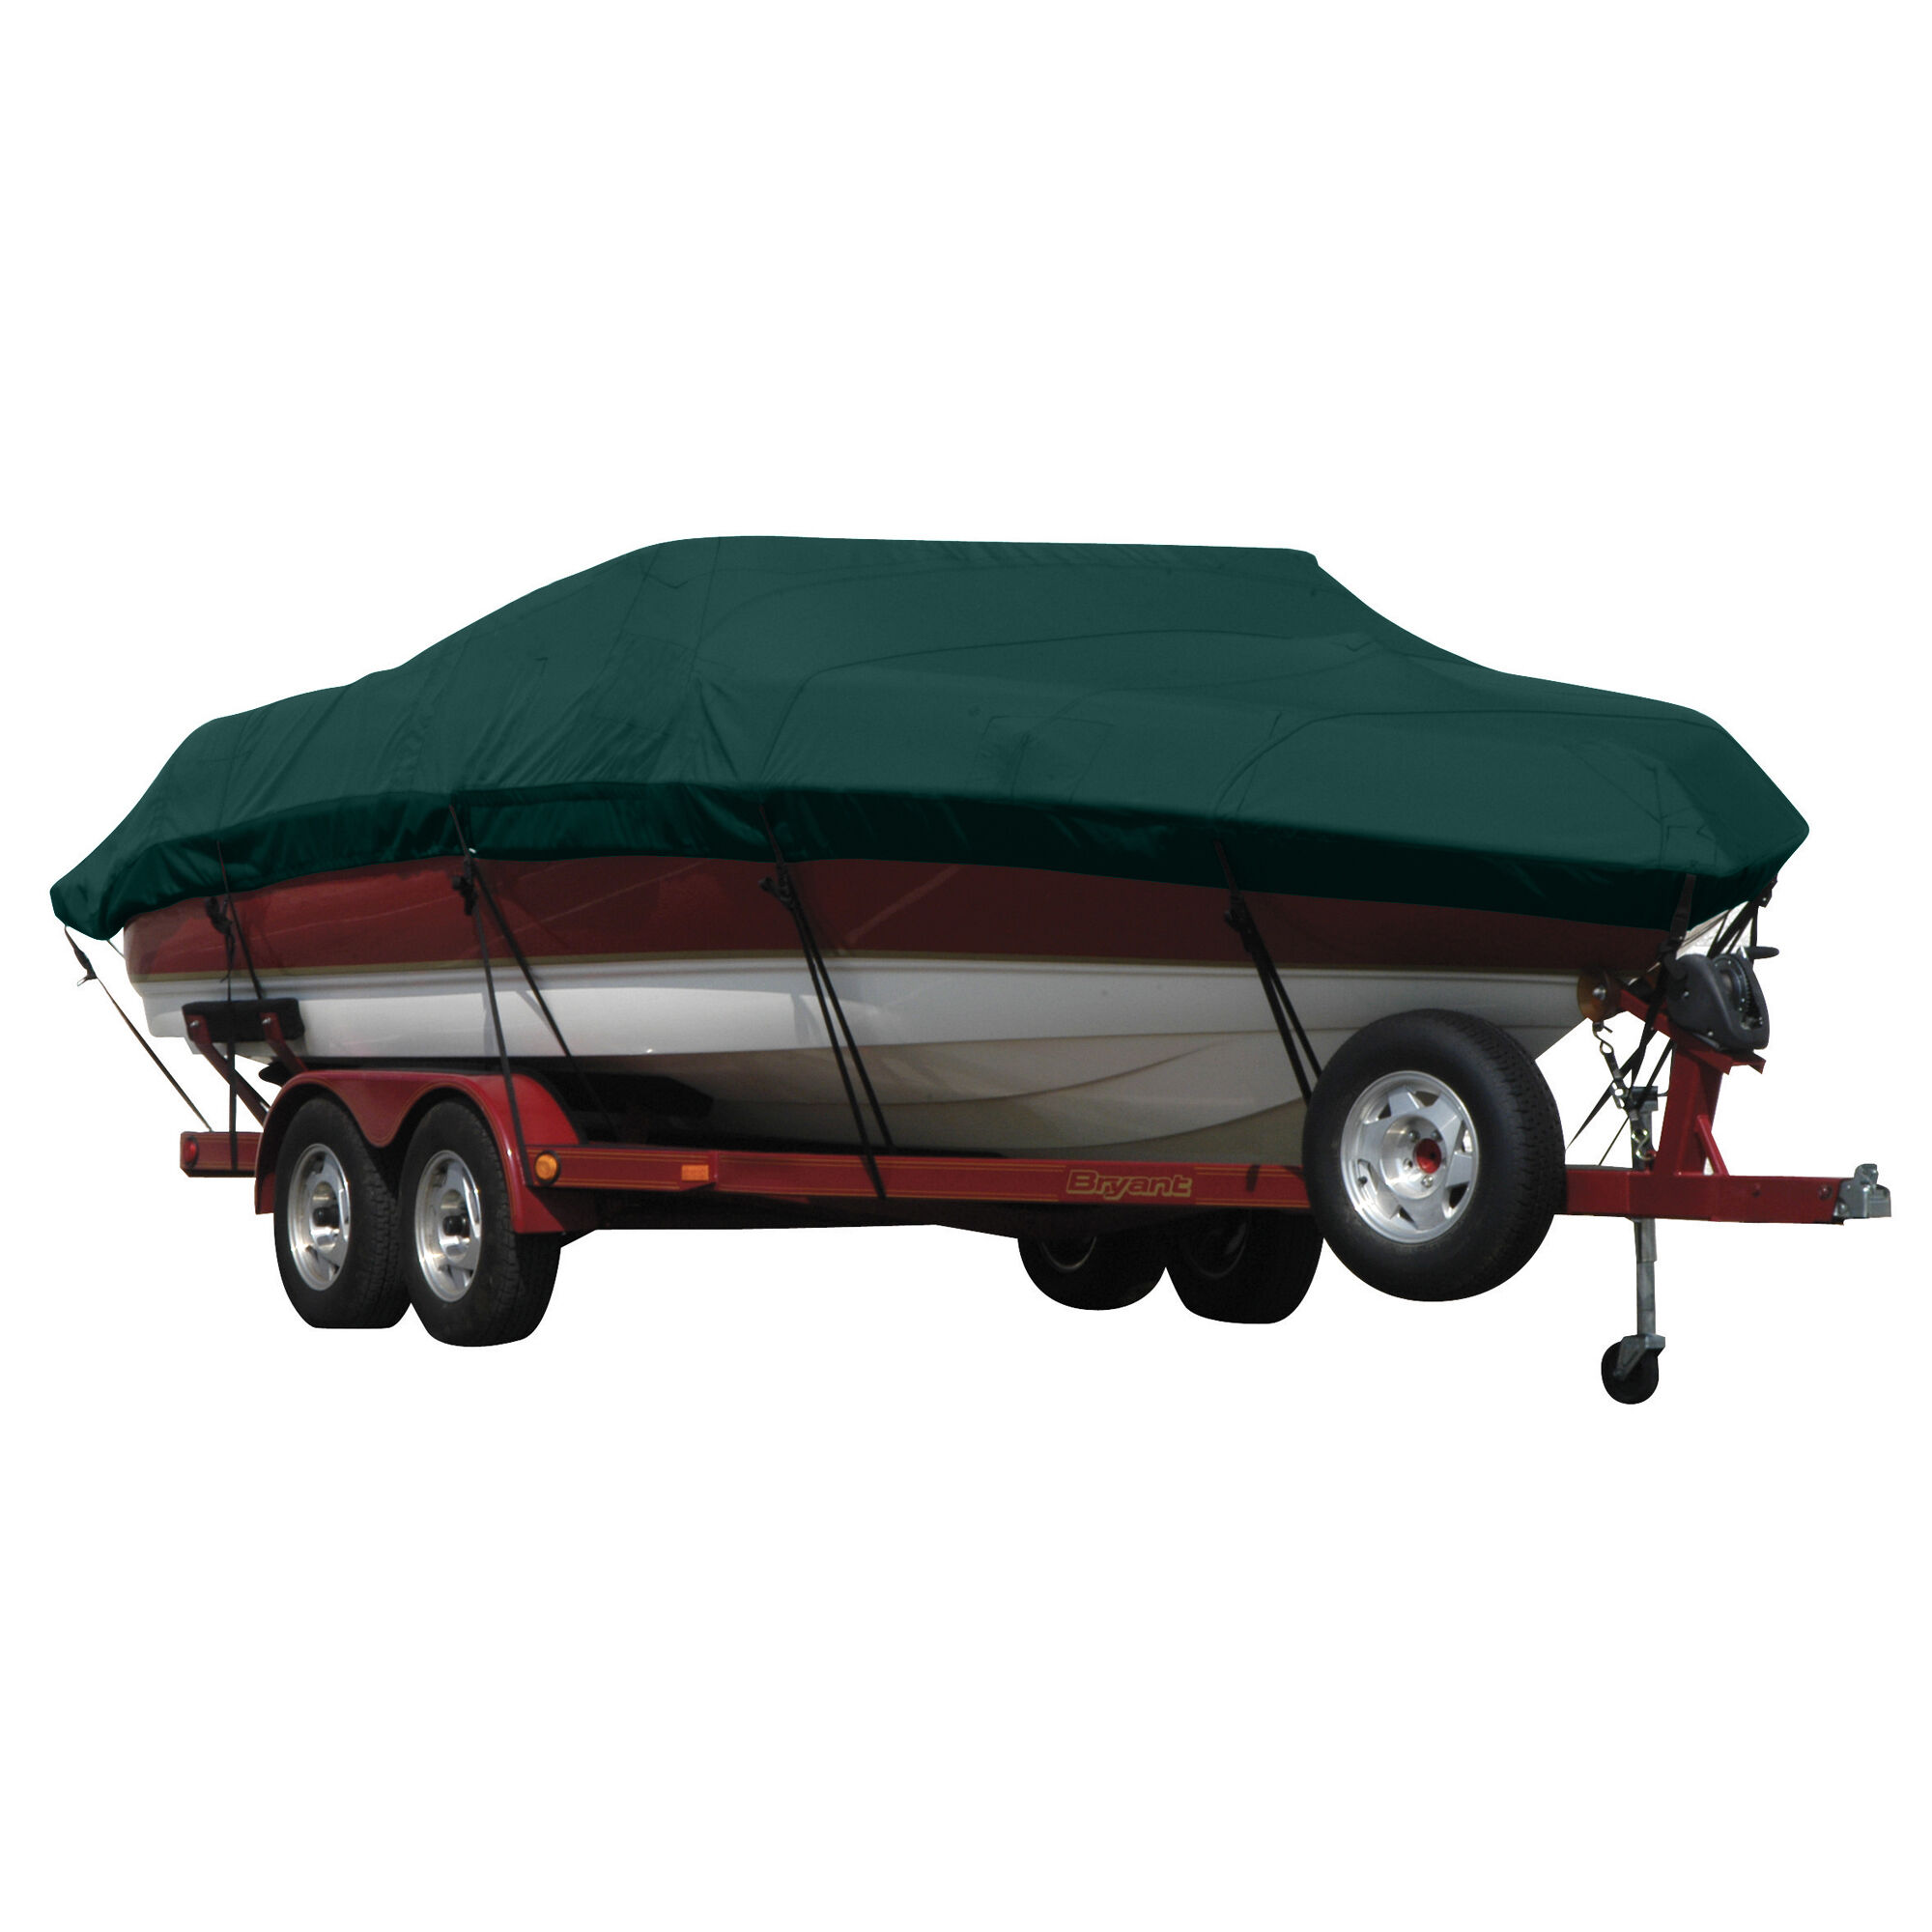 Covermate LOWE 1620 w/ SHIELD w/ PORT TROLL MOTOR O/B Boat Cover in Forest Green Acrylic